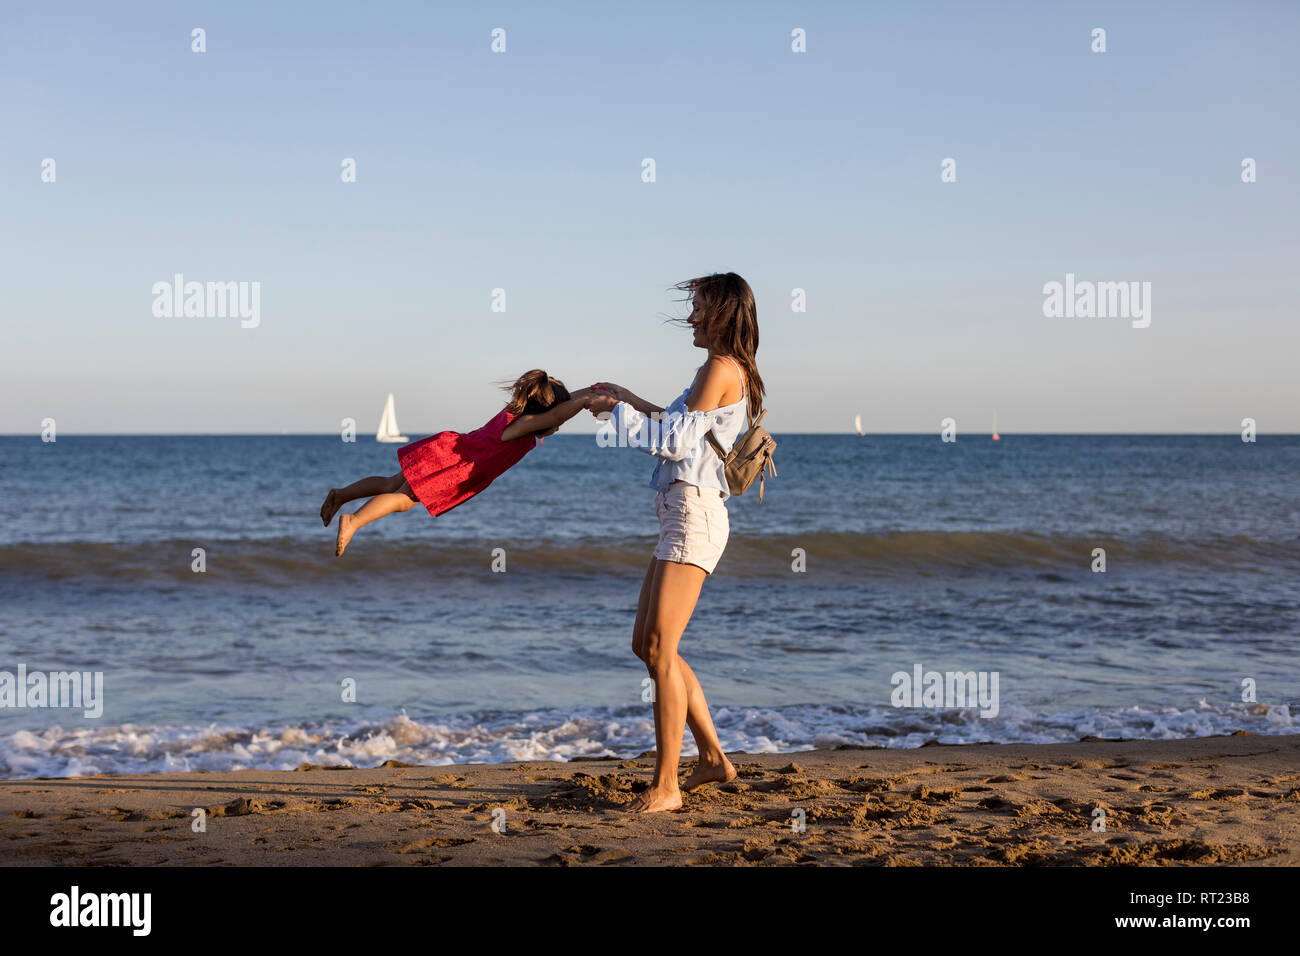 Mother and daughter having fun on the beach, pretending to fly Stock Photo